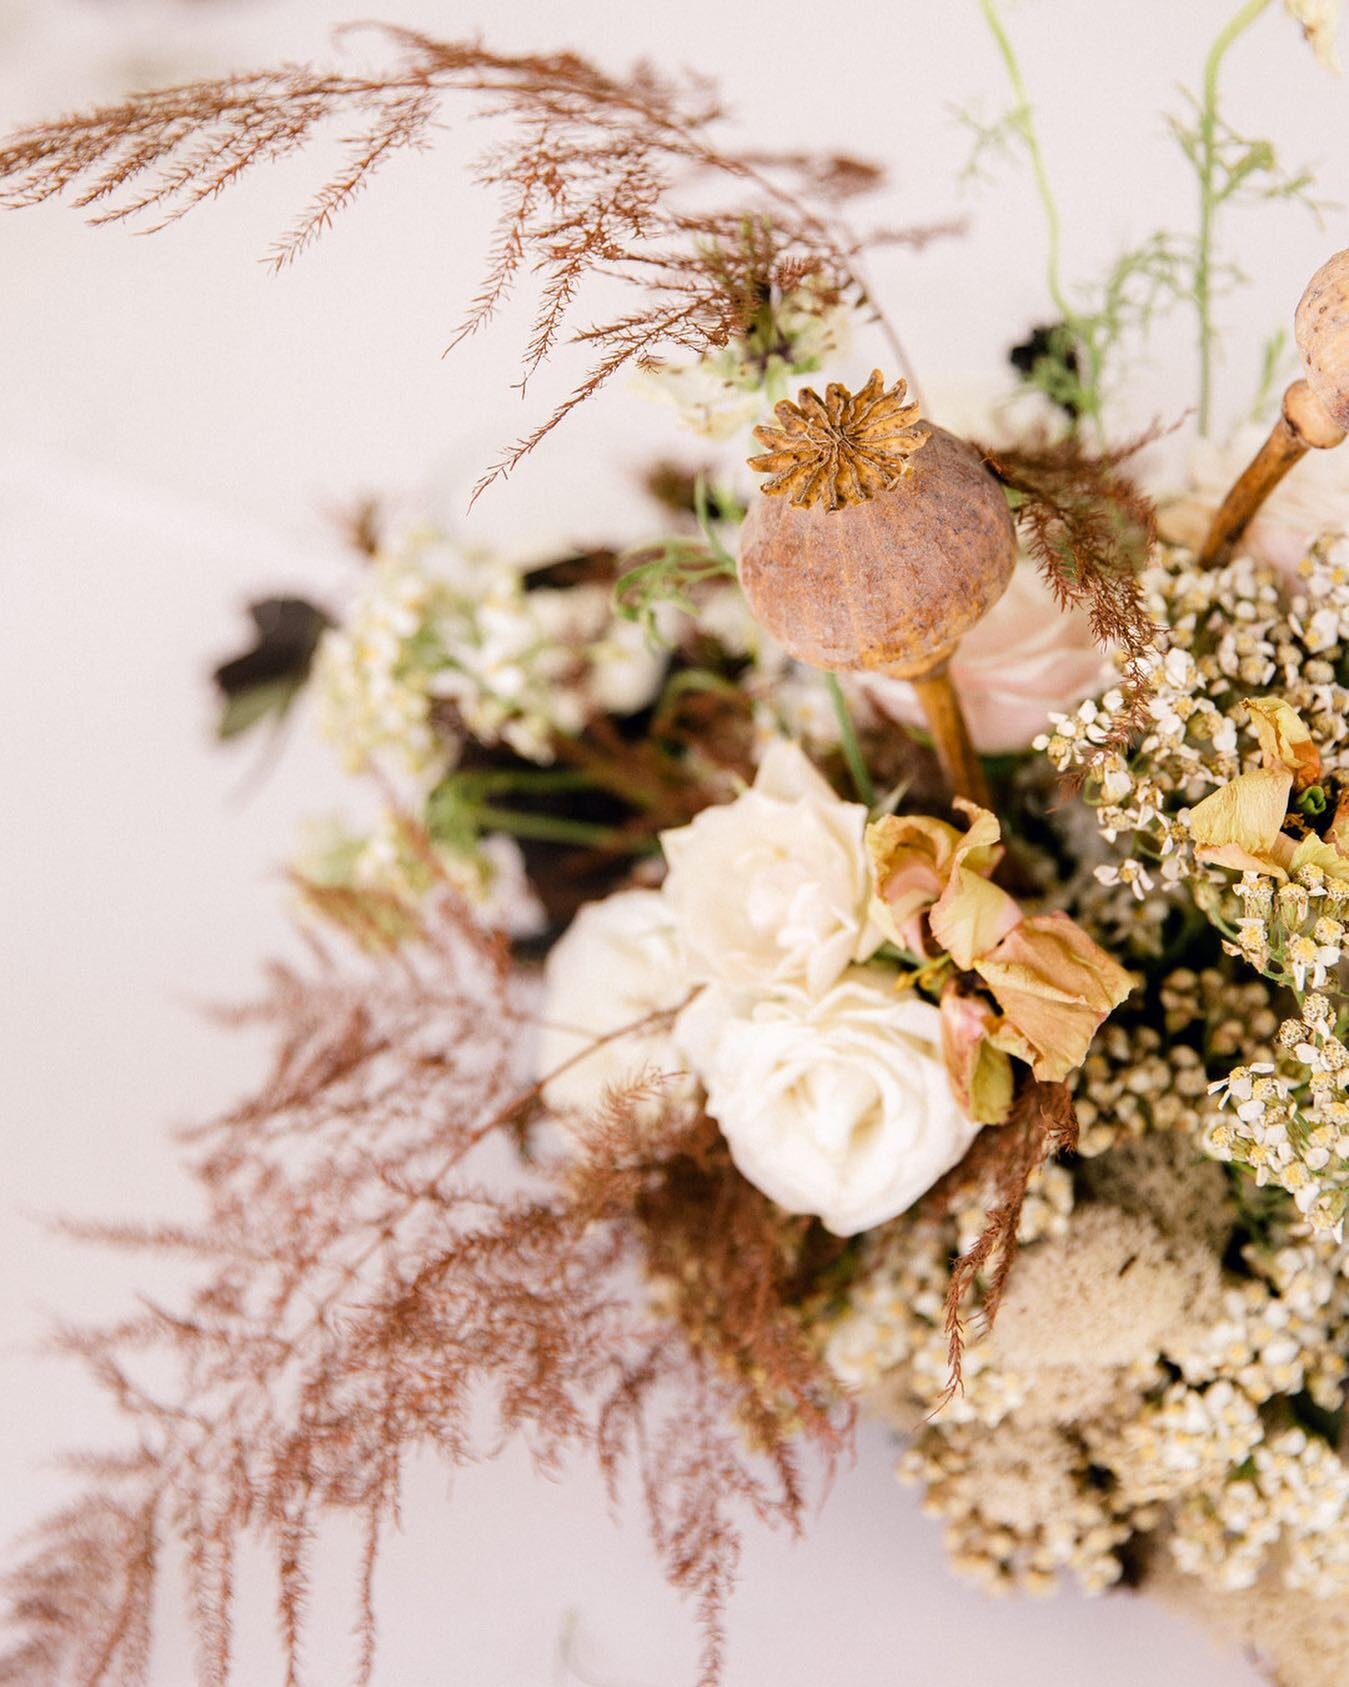 @manmade_and_sage created magic mixing dried and fresh florals &amp; tones that could easily go flat she brought the perfect balance &amp; textures together to make everything sing!! Loved seeing her work, and love how her florals brought this beauti